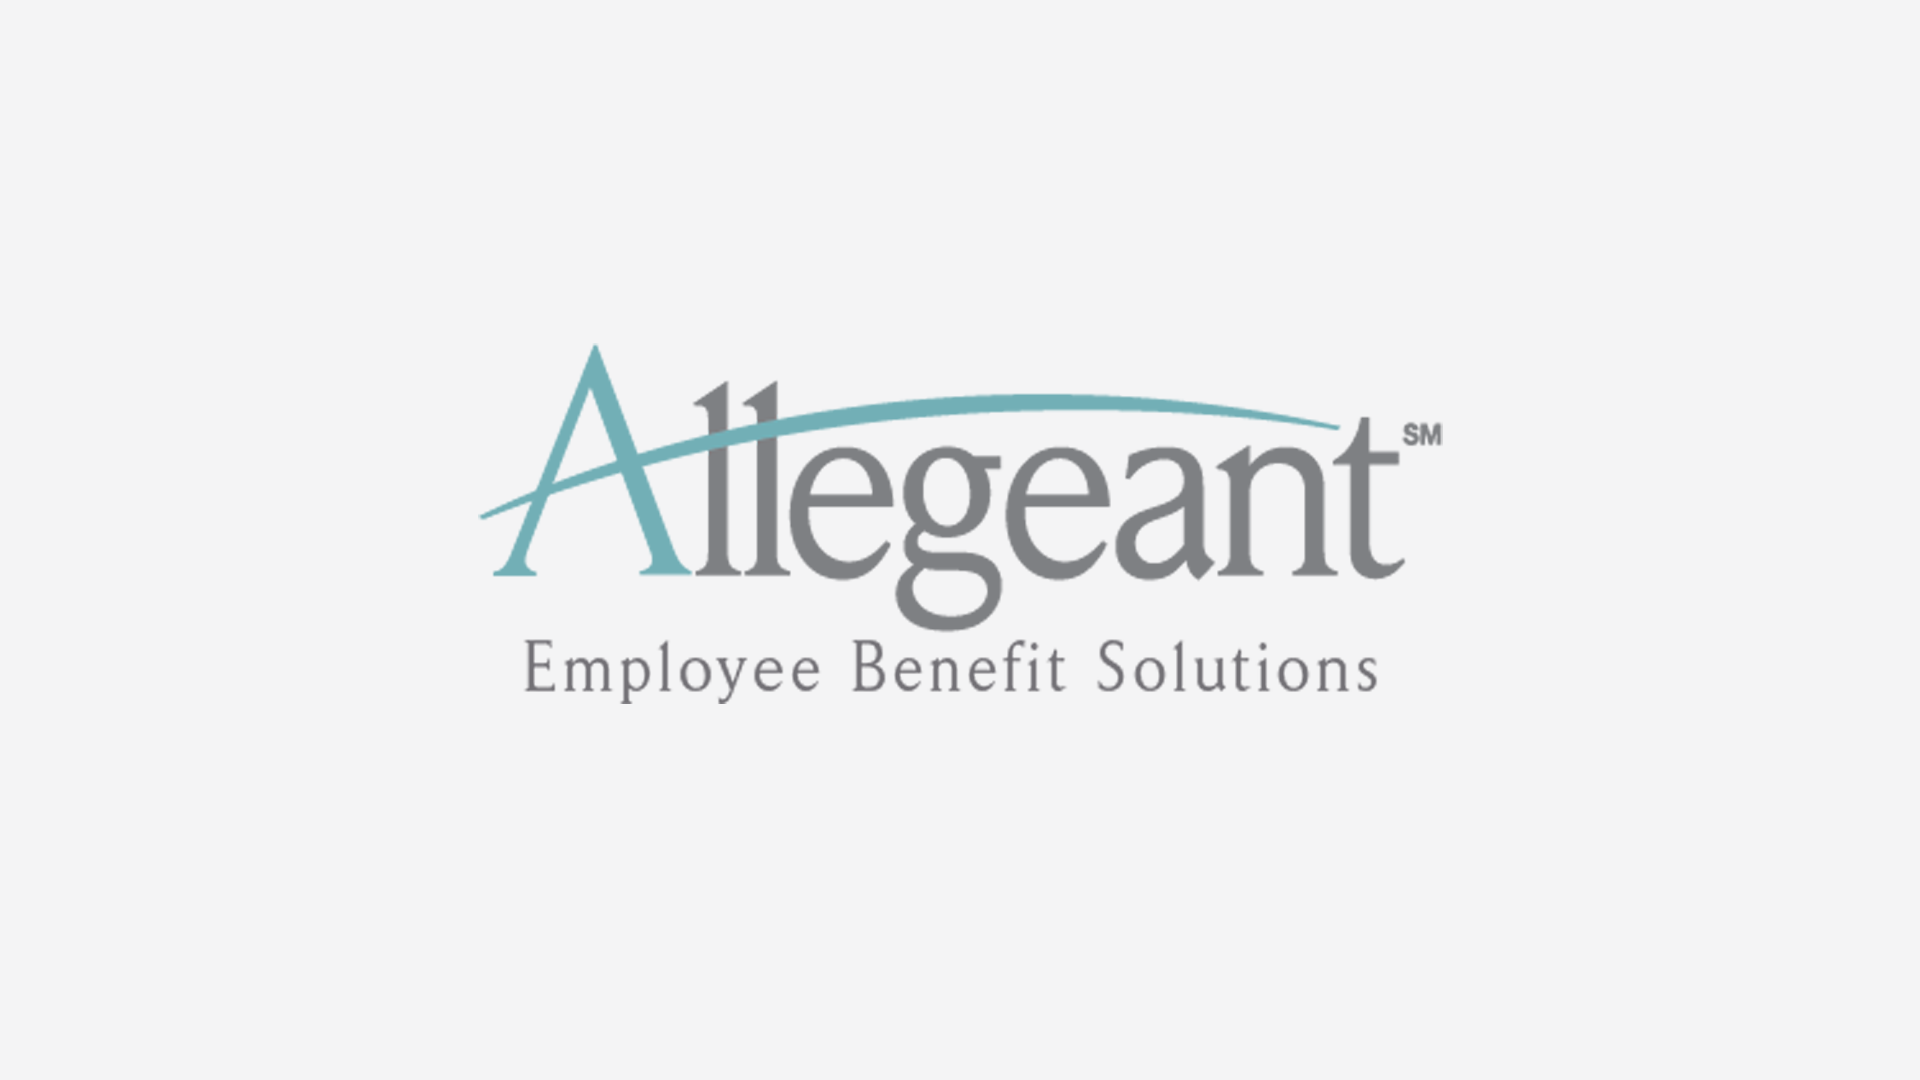 Allegeant Employee Benefit Solutions Logo Blue and Gray